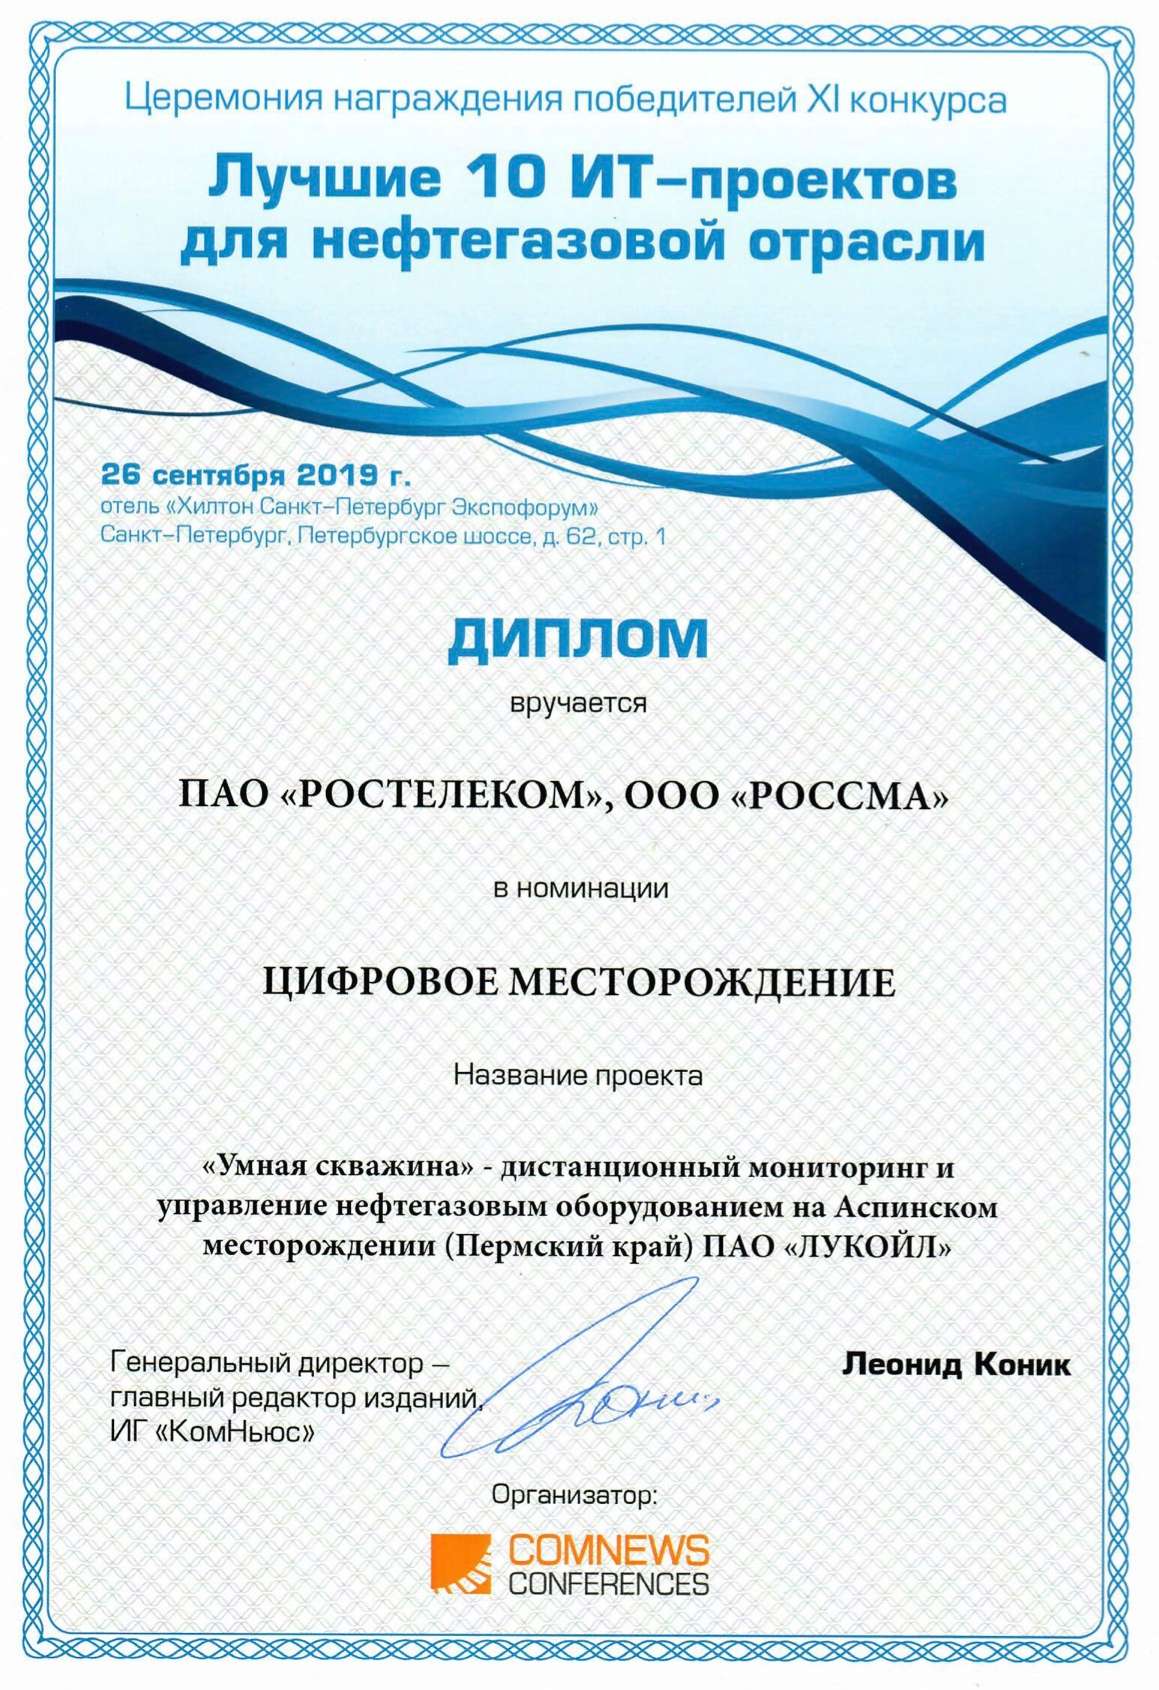 The project of ROSSMA company entered the TOP-10 Best IT Projects for Oil and Gas Industry